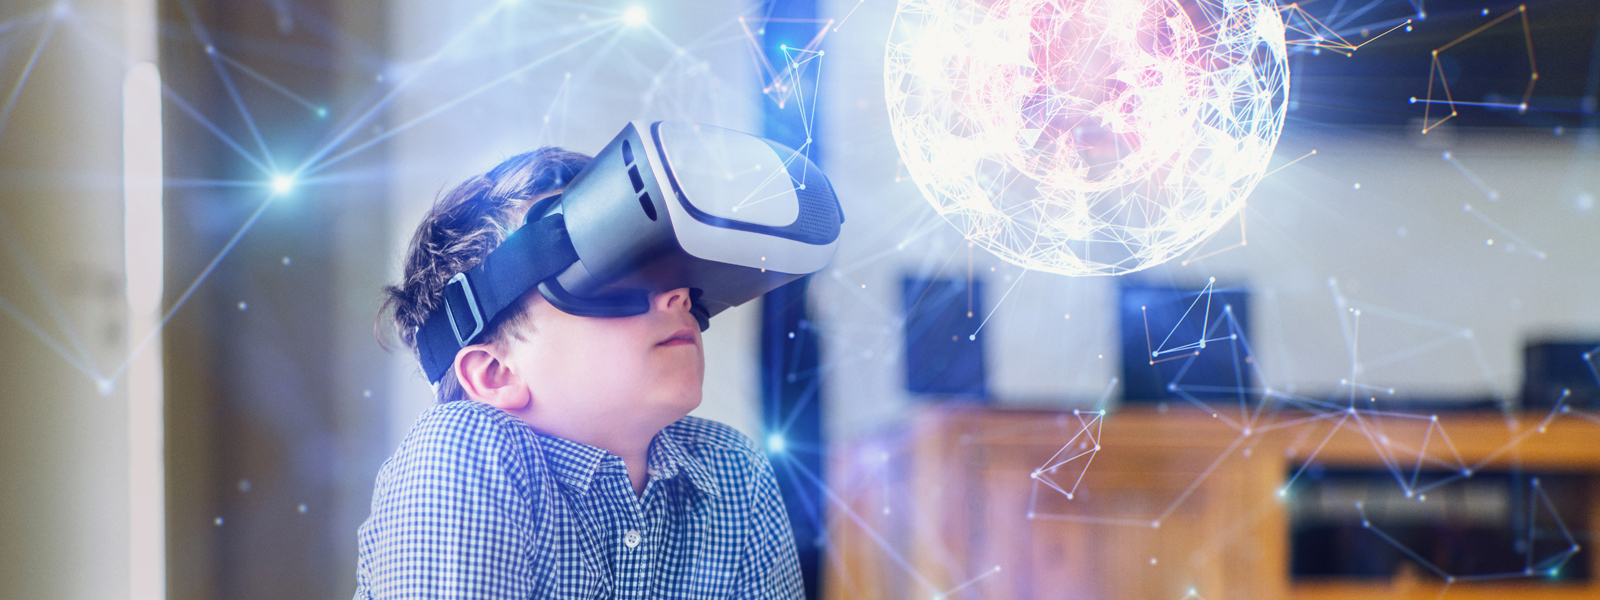 boy with virtual-reality goggles amazed by crystalline structure